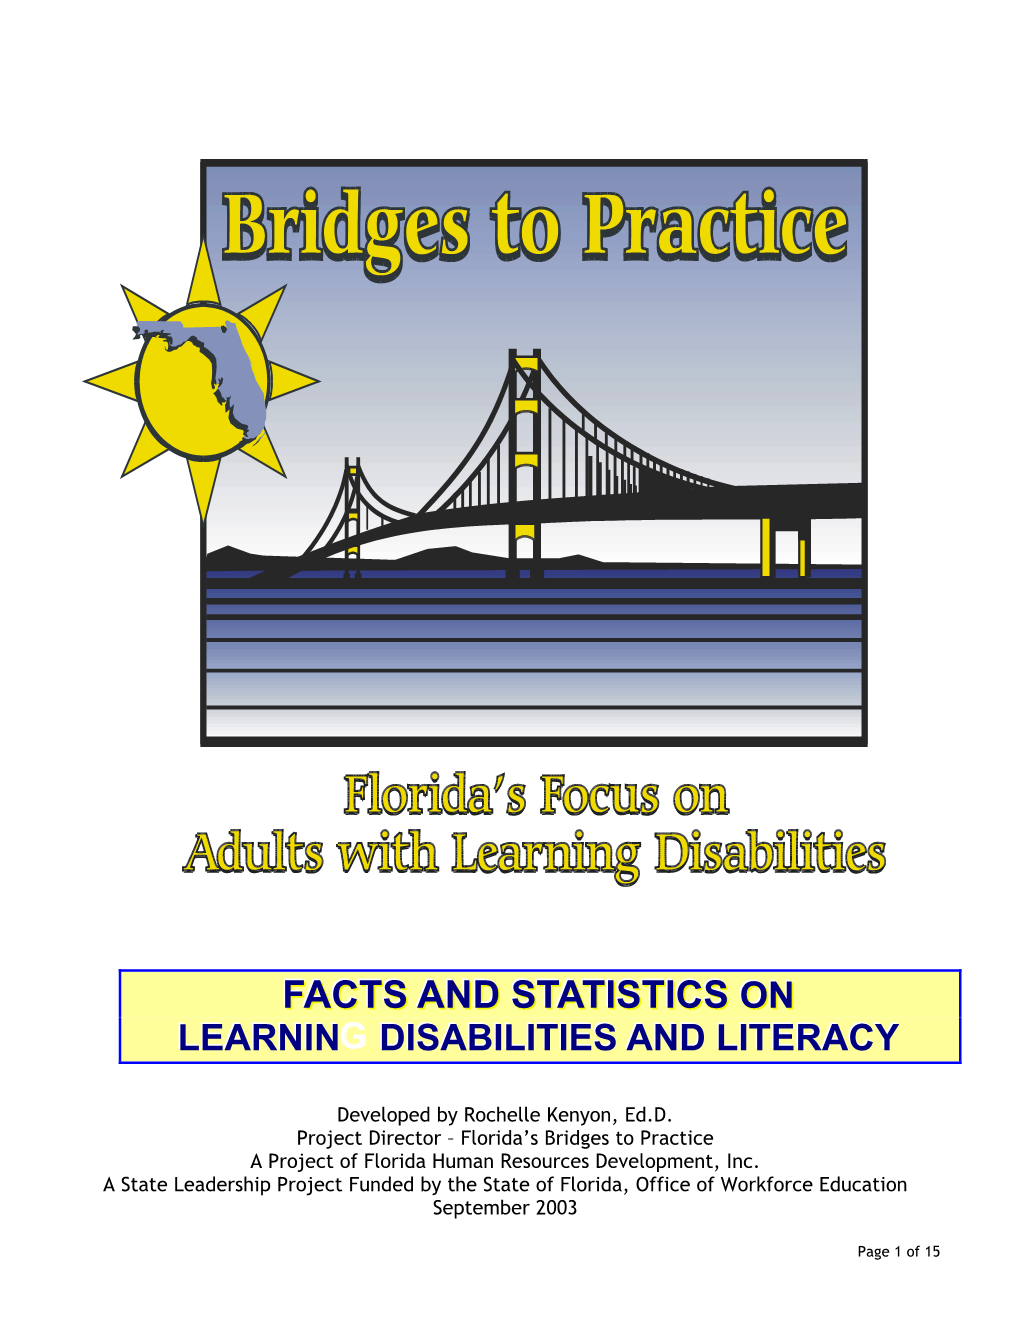 Facts & Statistics on Learning Disabilities and Literacy